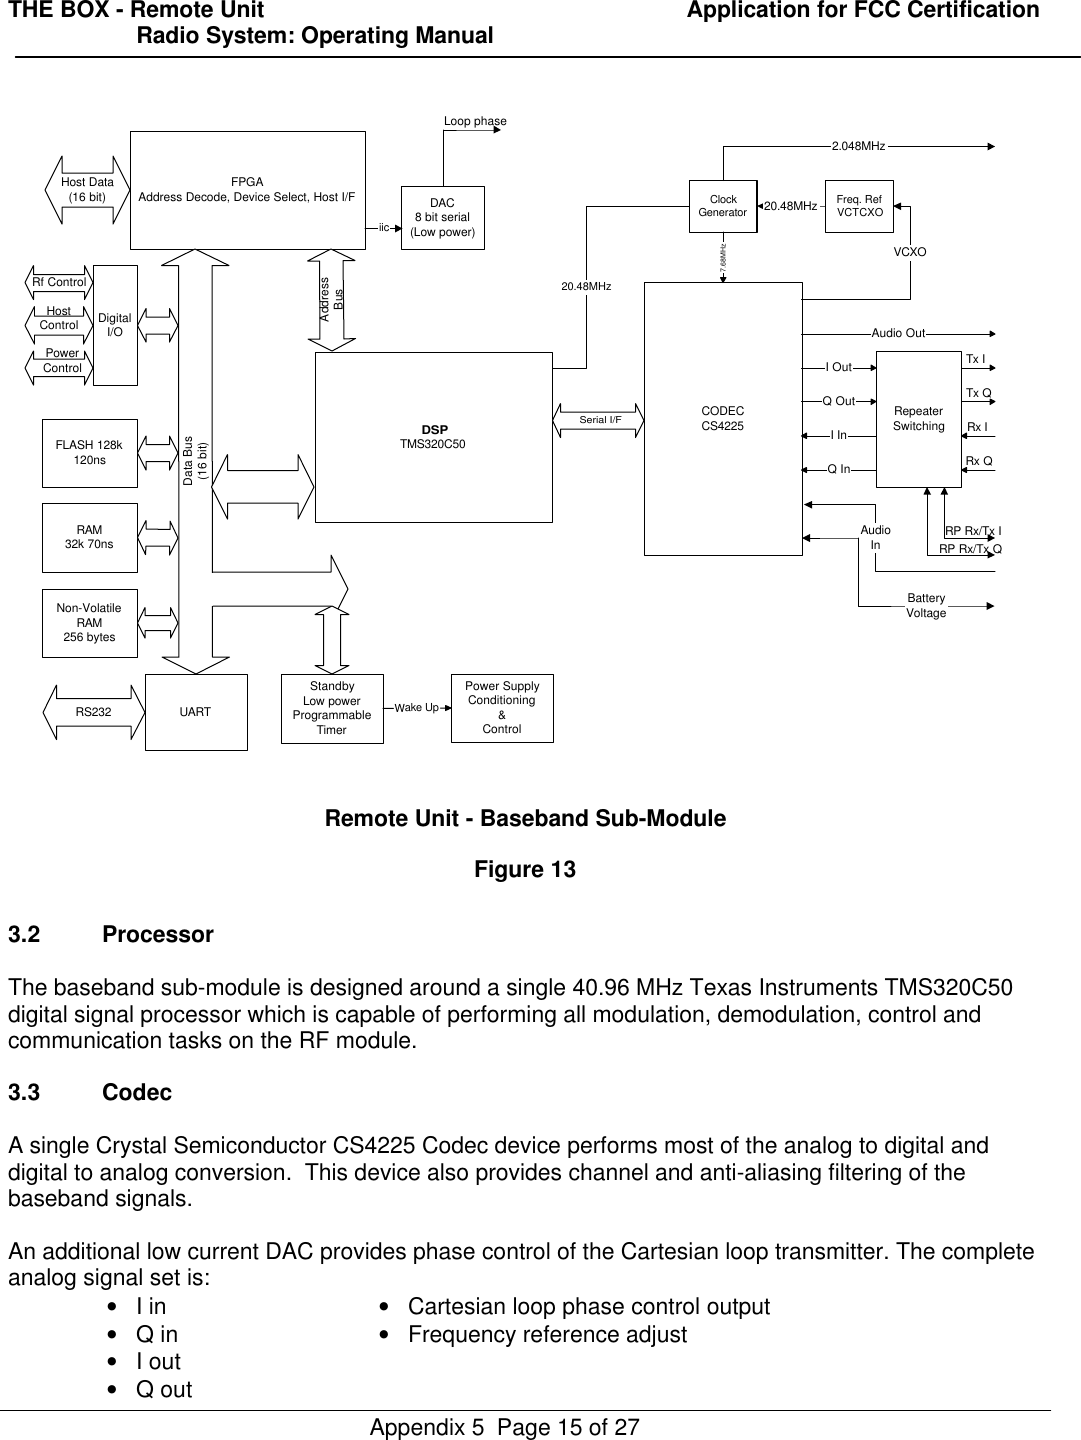 THE BOX - Remote Unit                                                                  Application for FCC Certification                    Radio System: Operating ManualAppendix 5  Page 15 of 27DSPTMS320C50Serial I/FCODECCS4225Audio OutI OutQ OutI InQ InClockGenerator Freq. RefVCTCXO7.68MHz20.48MHzVCXOFPGAAddress Decode, Device Select, Host I/FAddressBusHost Data(16 bit)FLASH 128k120nsData Bus(16 bit)RAM32k 70nsUARTRS232Non-VolatileRAM256 bytesStandbyLow powerProgrammableTimerPower SupplyConditioning&amp;ControlWake UpDAC8 bit serial(Low power)RepeaterSwitching2.048MHzAudioInTx ITx QRx IRx QRP Rx/Tx IRP Rx/Tx QiicLoop phase20.48MHzDigitalI/ORf ControlBatteryVoltagePowerControlHostControlRemote Unit - Baseband Sub-ModuleFigure 133.2 ProcessorThe baseband sub-module is designed around a single 40.96 MHz Texas Instruments TMS320C50digital signal processor which is capable of performing all modulation, demodulation, control andcommunication tasks on the RF module.3.3 CodecA single Crystal Semiconductor CS4225 Codec device performs most of the analog to digital anddigital to analog conversion.  This device also provides channel and anti-aliasing filtering of thebaseband signals.An additional low current DAC provides phase control of the Cartesian loop transmitter. The completeanalog signal set is:• I in • Cartesian loop phase control output• Q in • Frequency reference adjust• I out• Q out